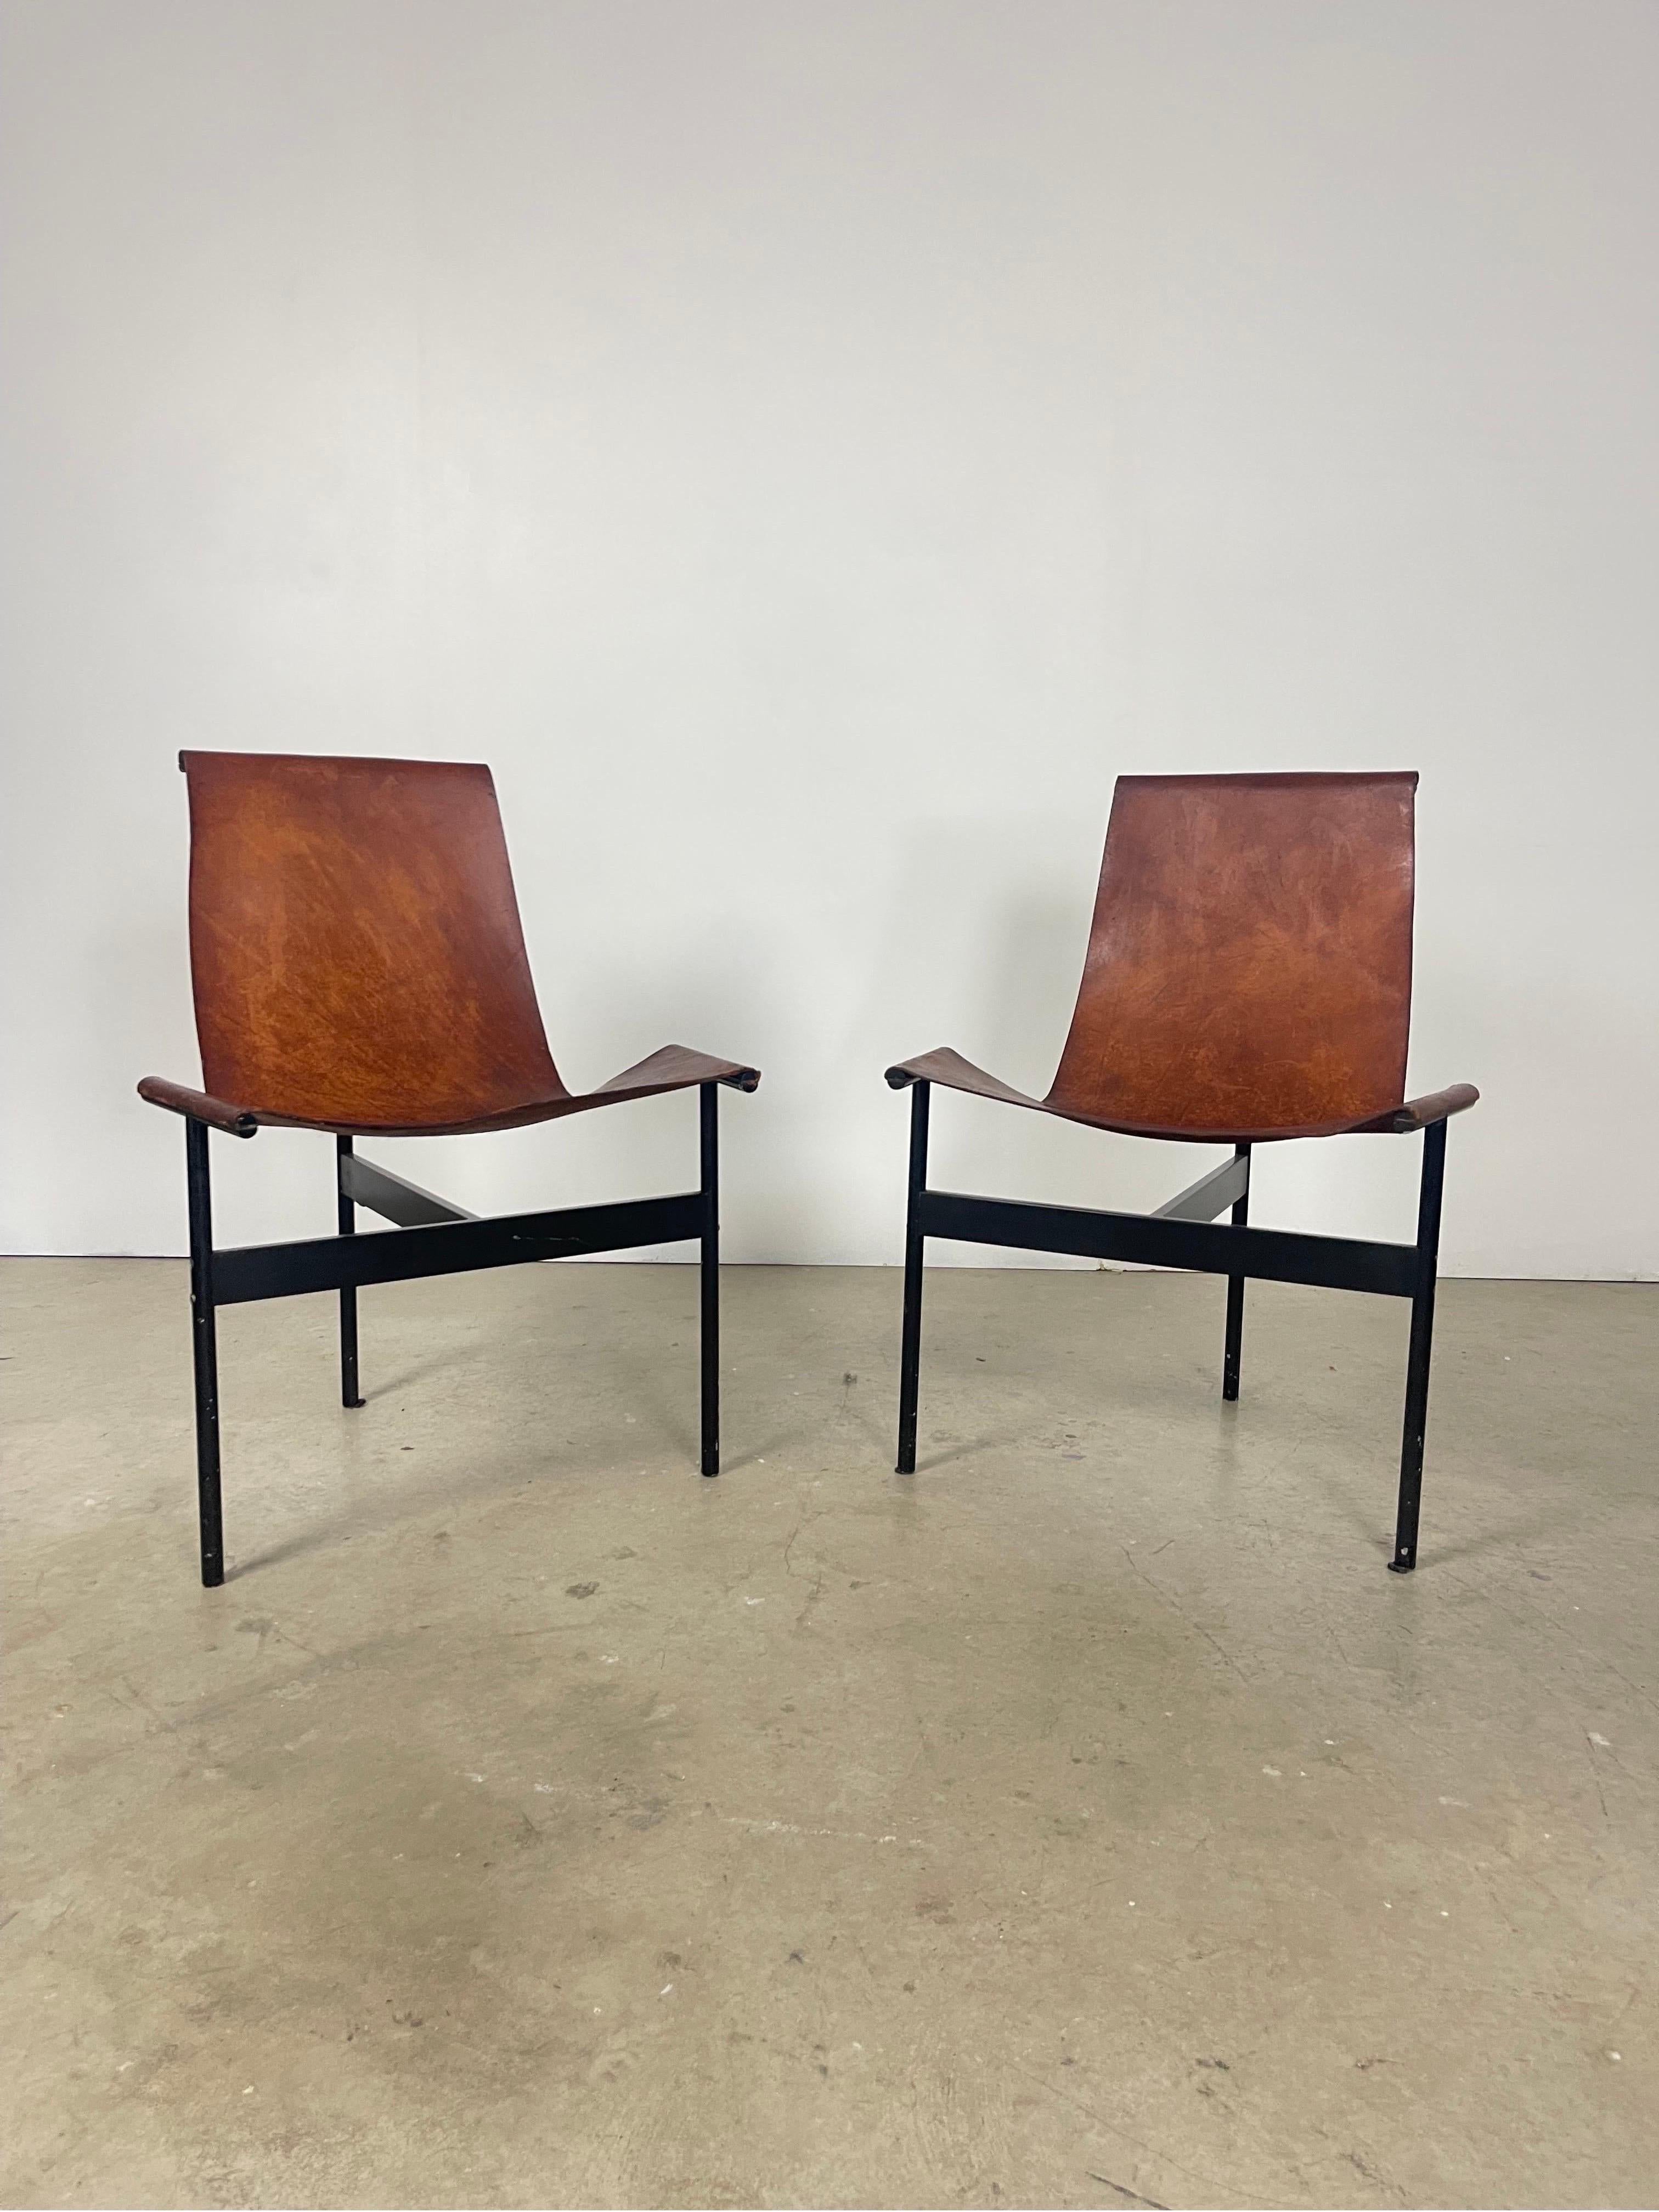 20th Century Pair of T Side Chairs by Katavalos, Littell, and Kelly for Laverne International